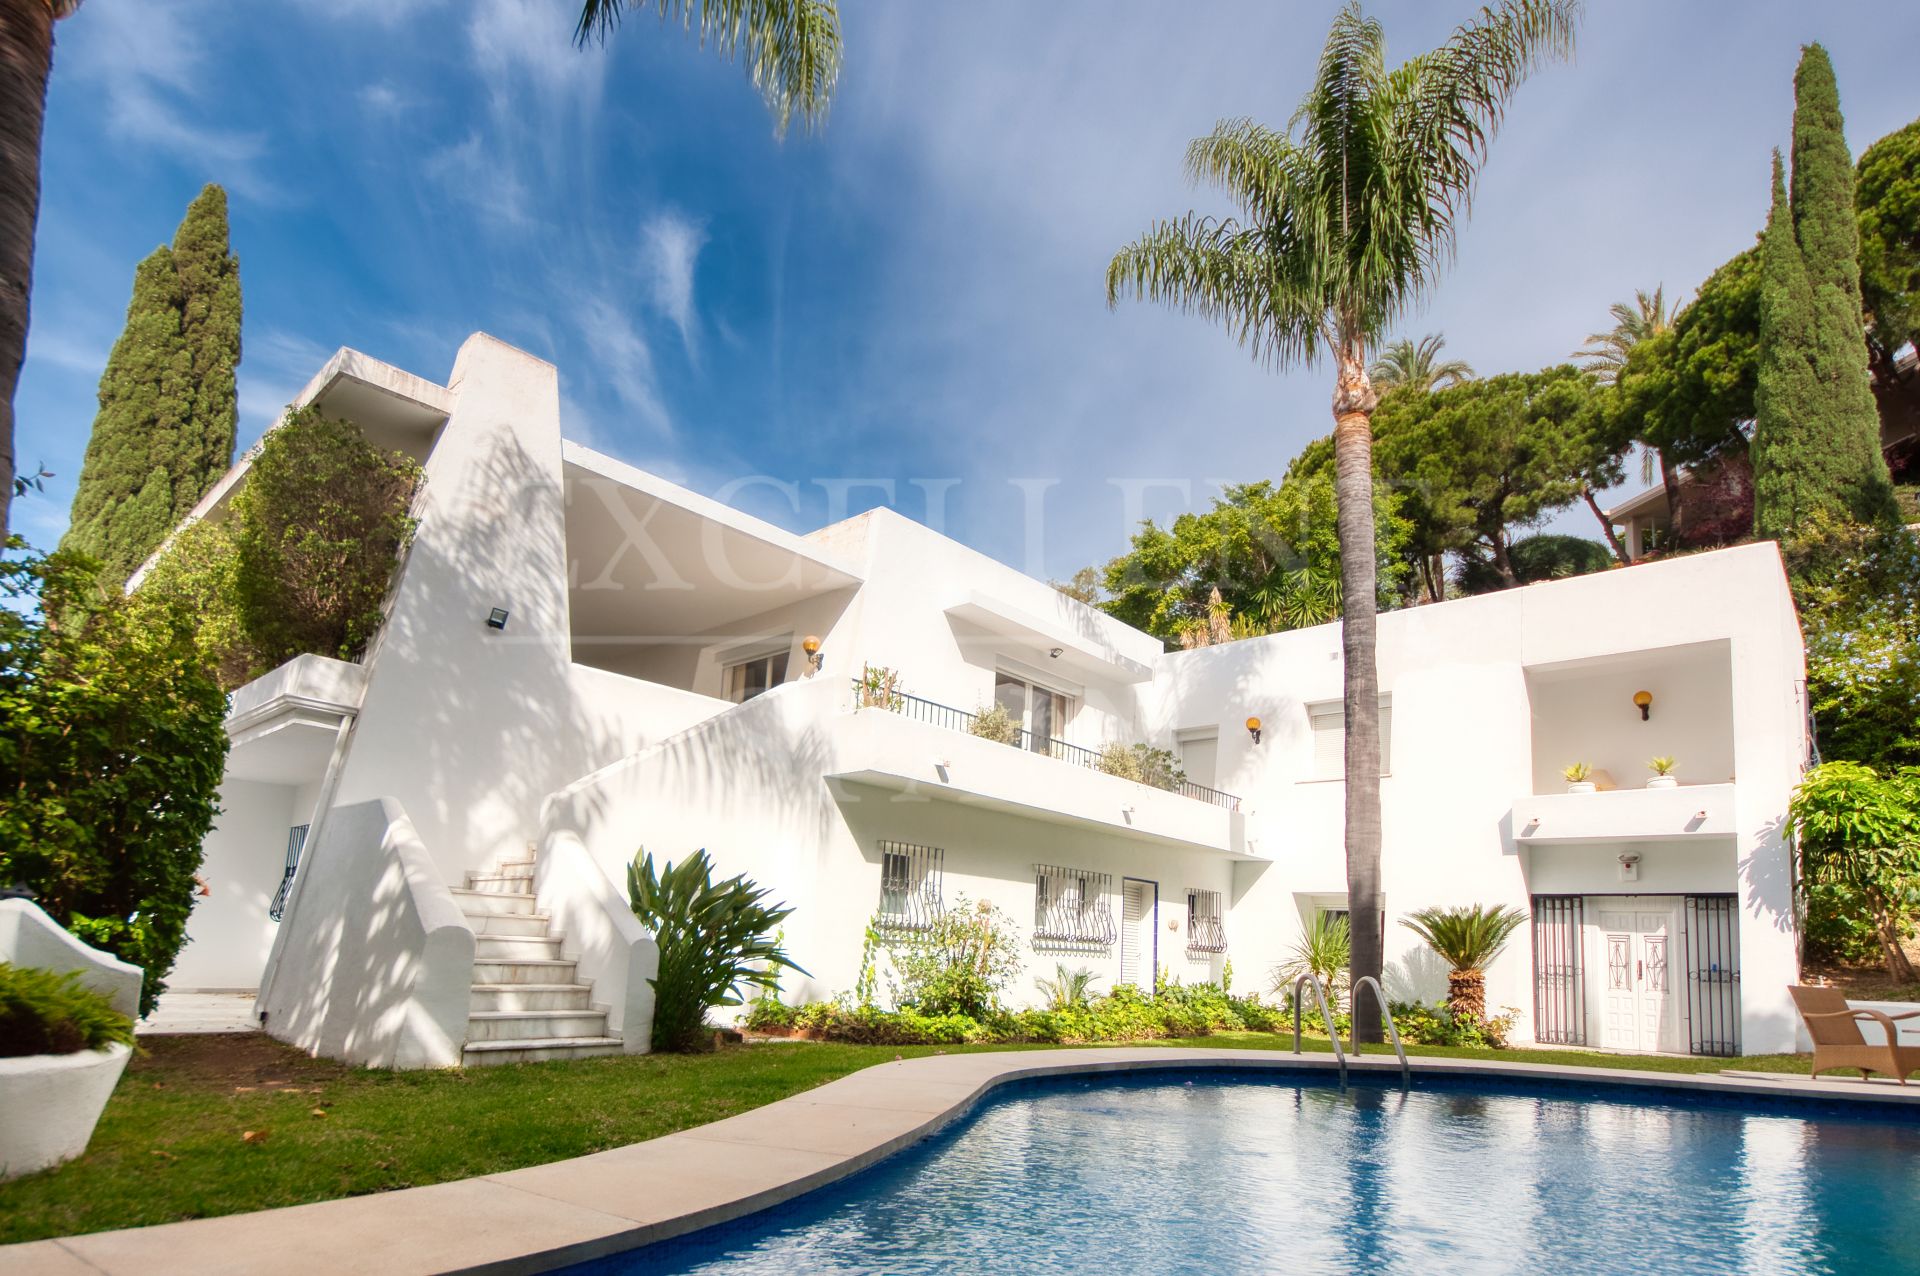 Rio Real, Marbella, villa for sale with an elegant and timeless design